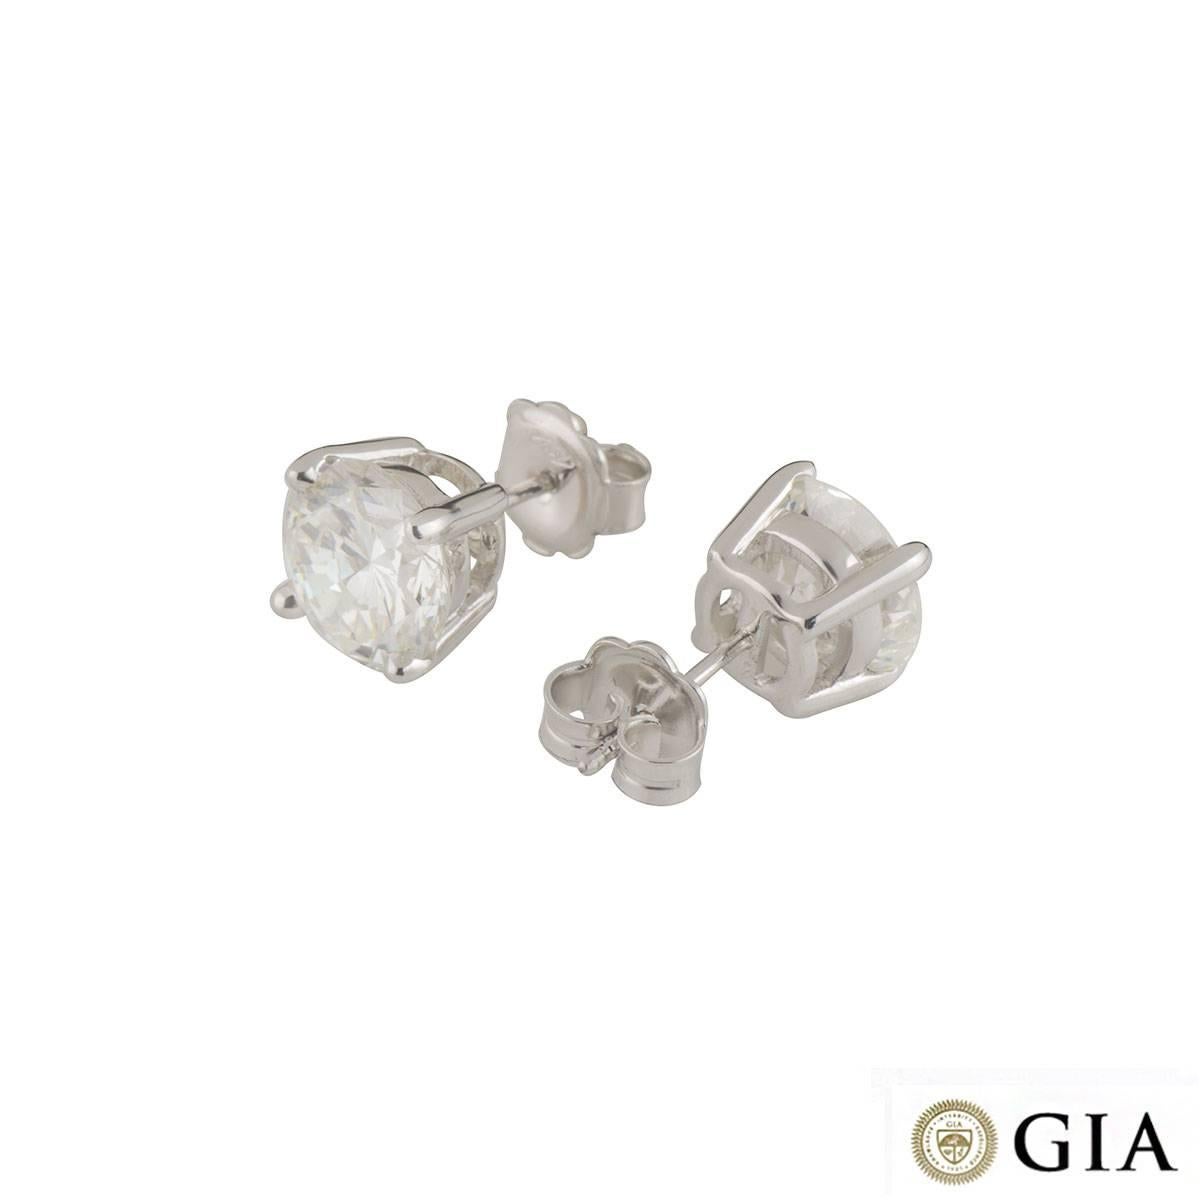 Round Cut GIA Certified Diamond Stud Earrings Total 5.12 carats